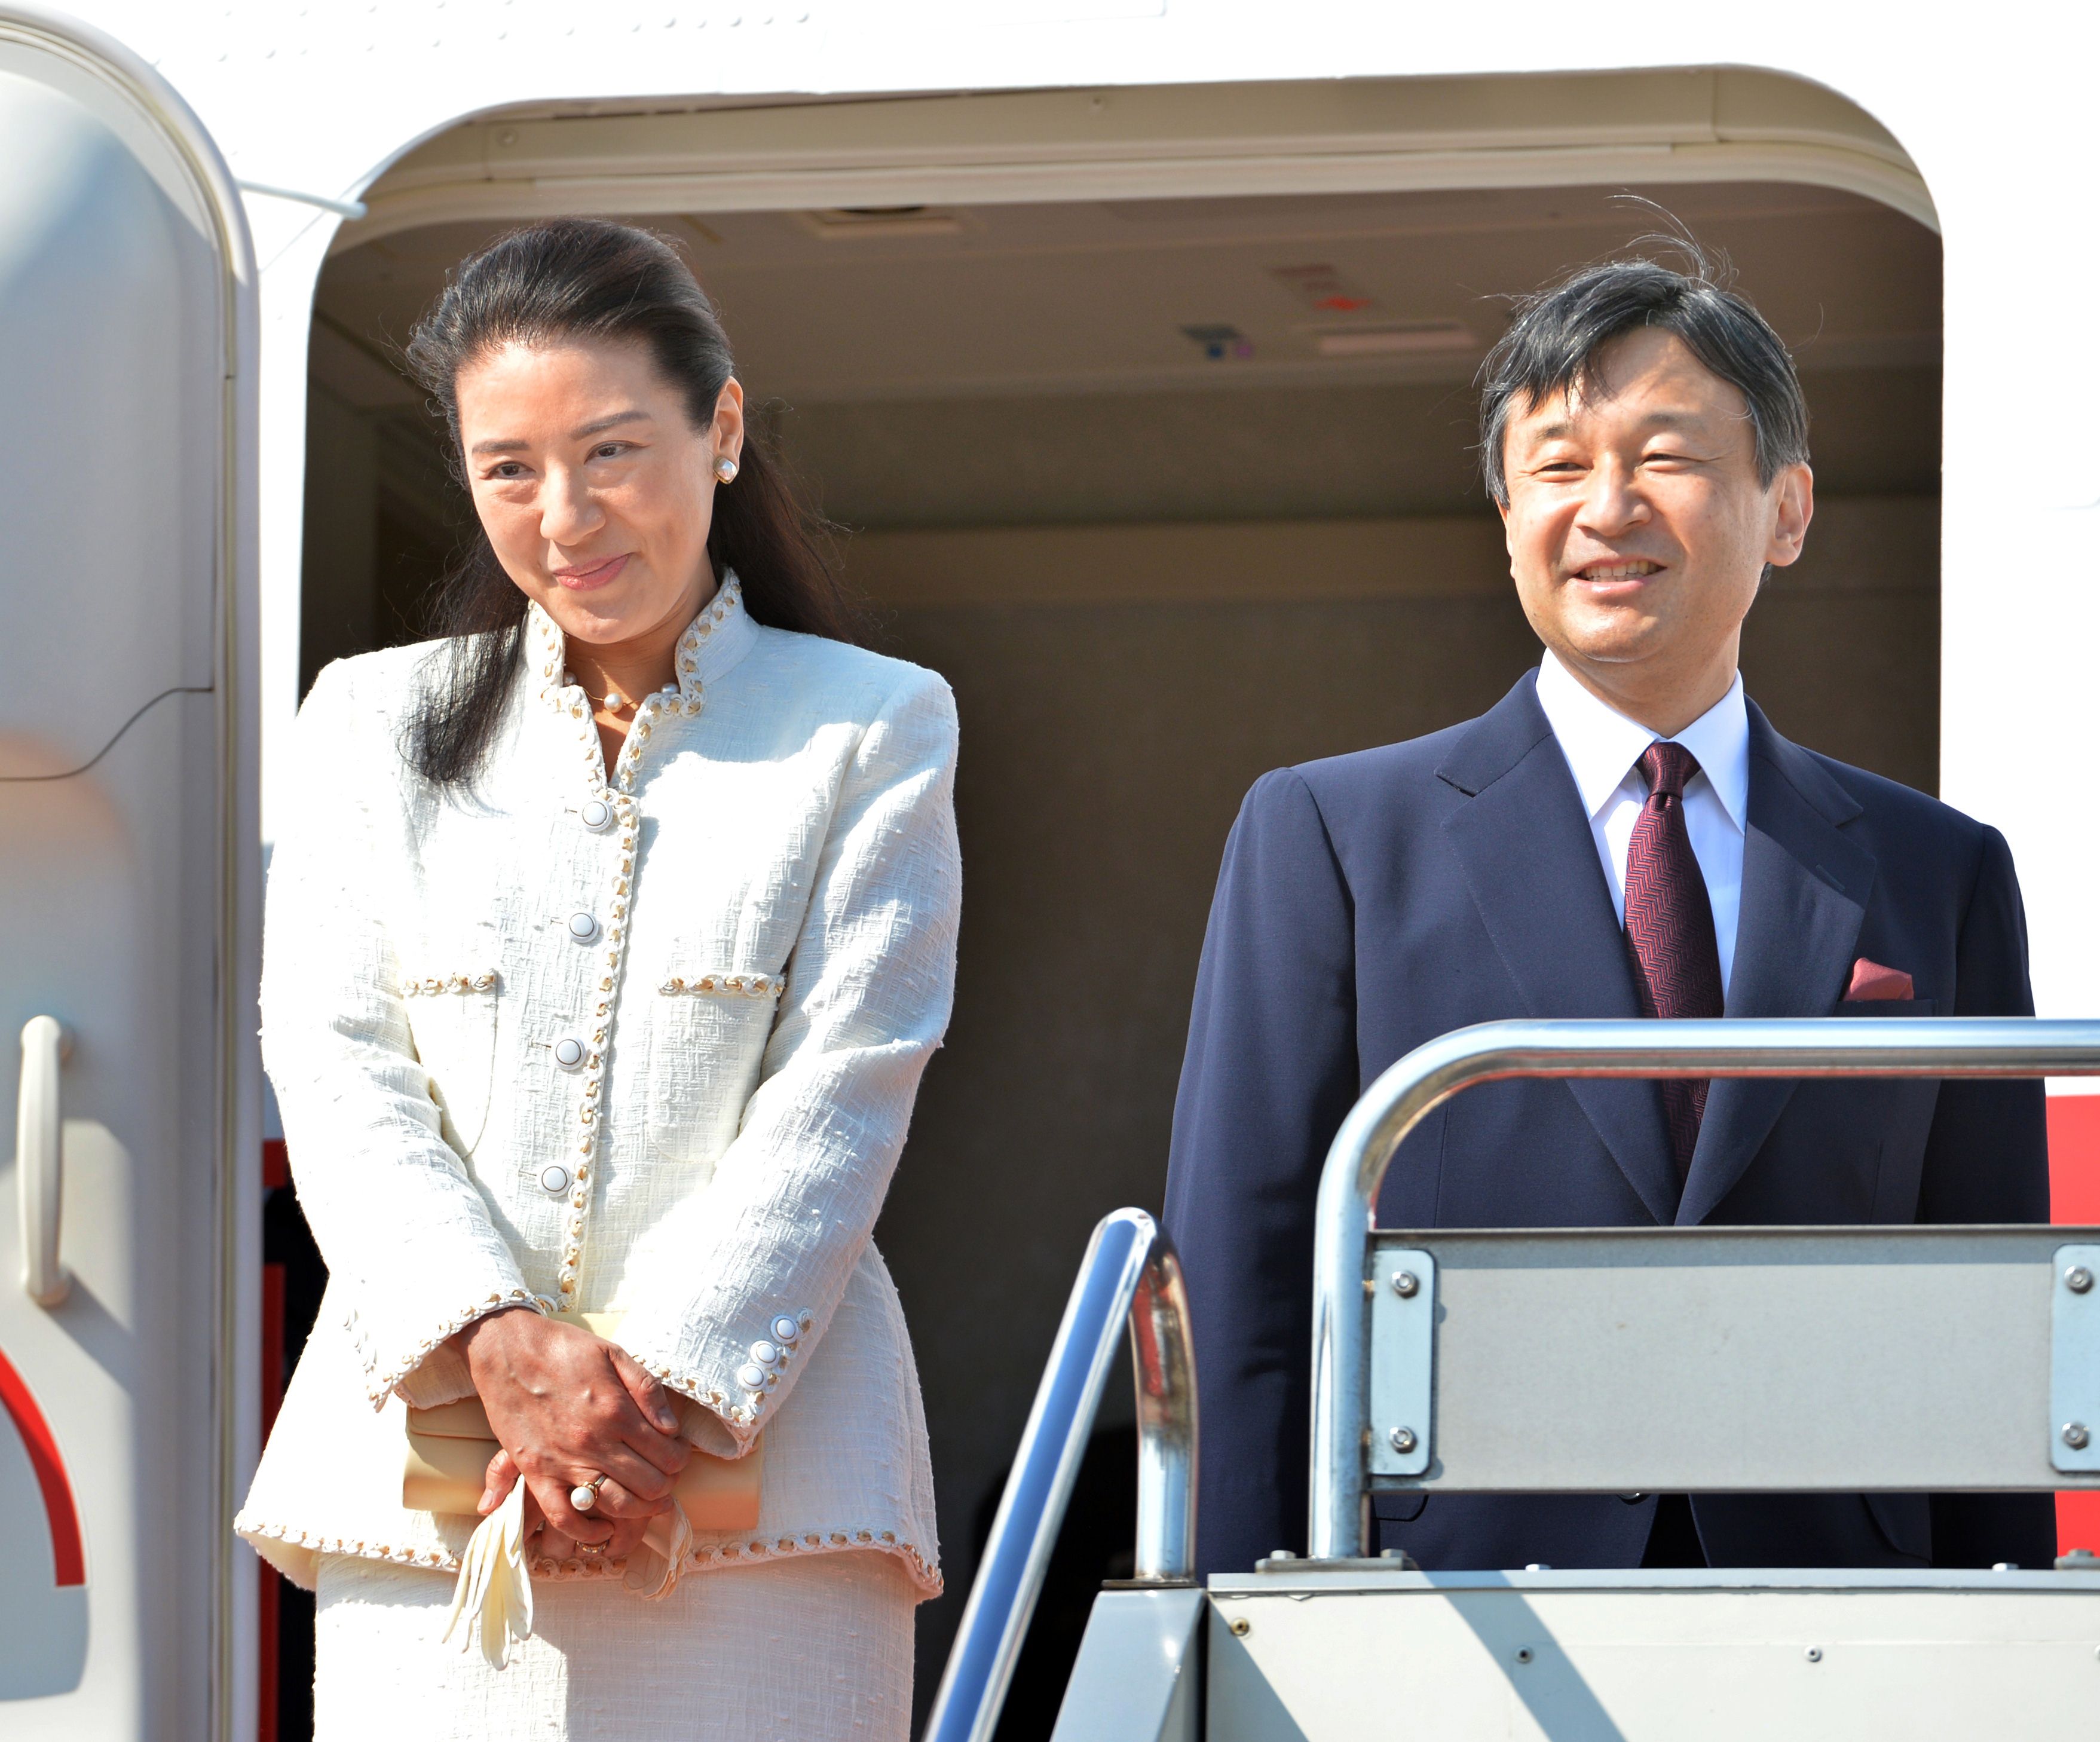 Up and away: Crown Princess Masako and Crown Prince Naruhito acknowledge the crowd before boarding a plane for the Netherlands at Tokyo's Haneda airport on Sunday. The Crown Princess, who has been suffering from a mysterious stress-induced illness for more than a decade, is taking her first official overseas trip in 11 years. | AFP-JIJI